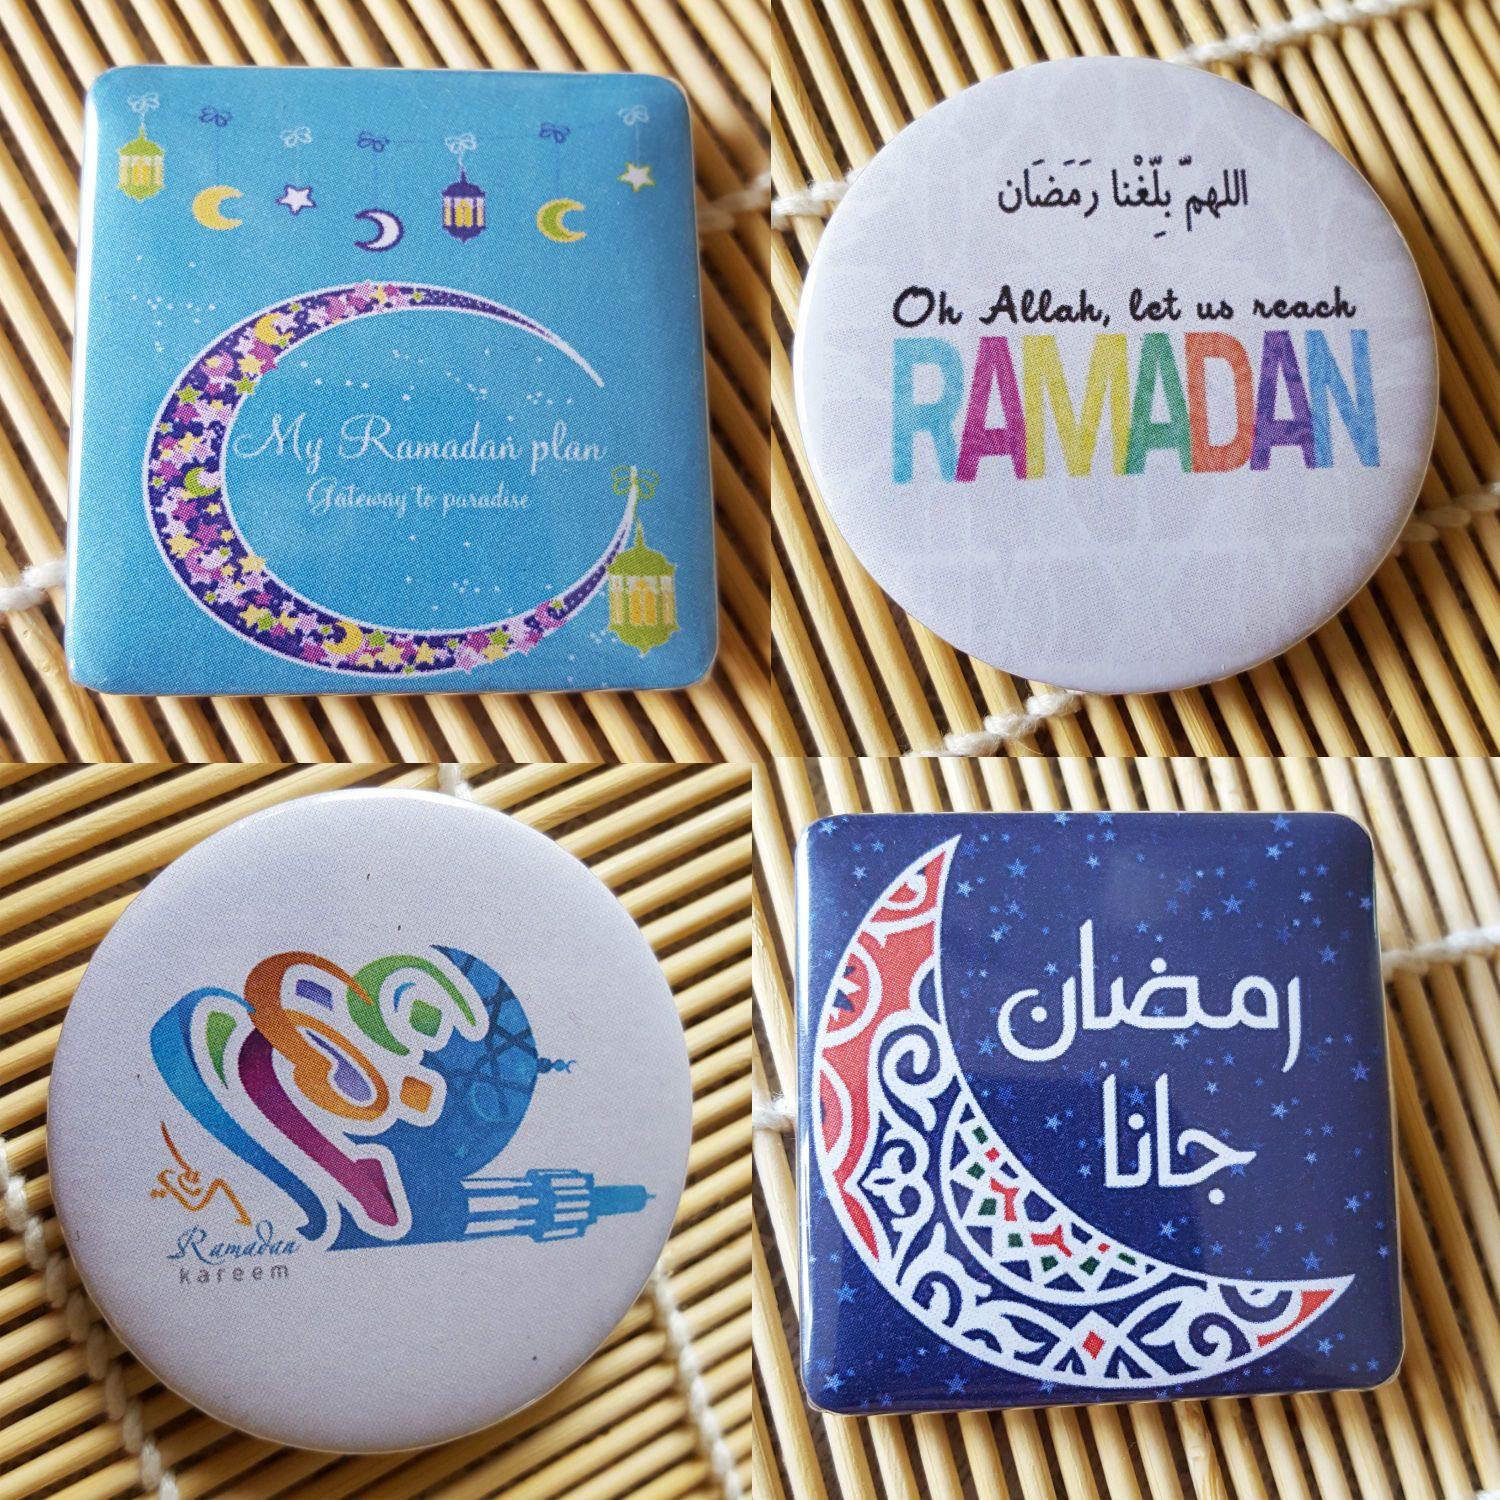 Muslim Badge Button Pin Keep Calm and (Big Size 2.25inch/58mm) Islam Gift No 6